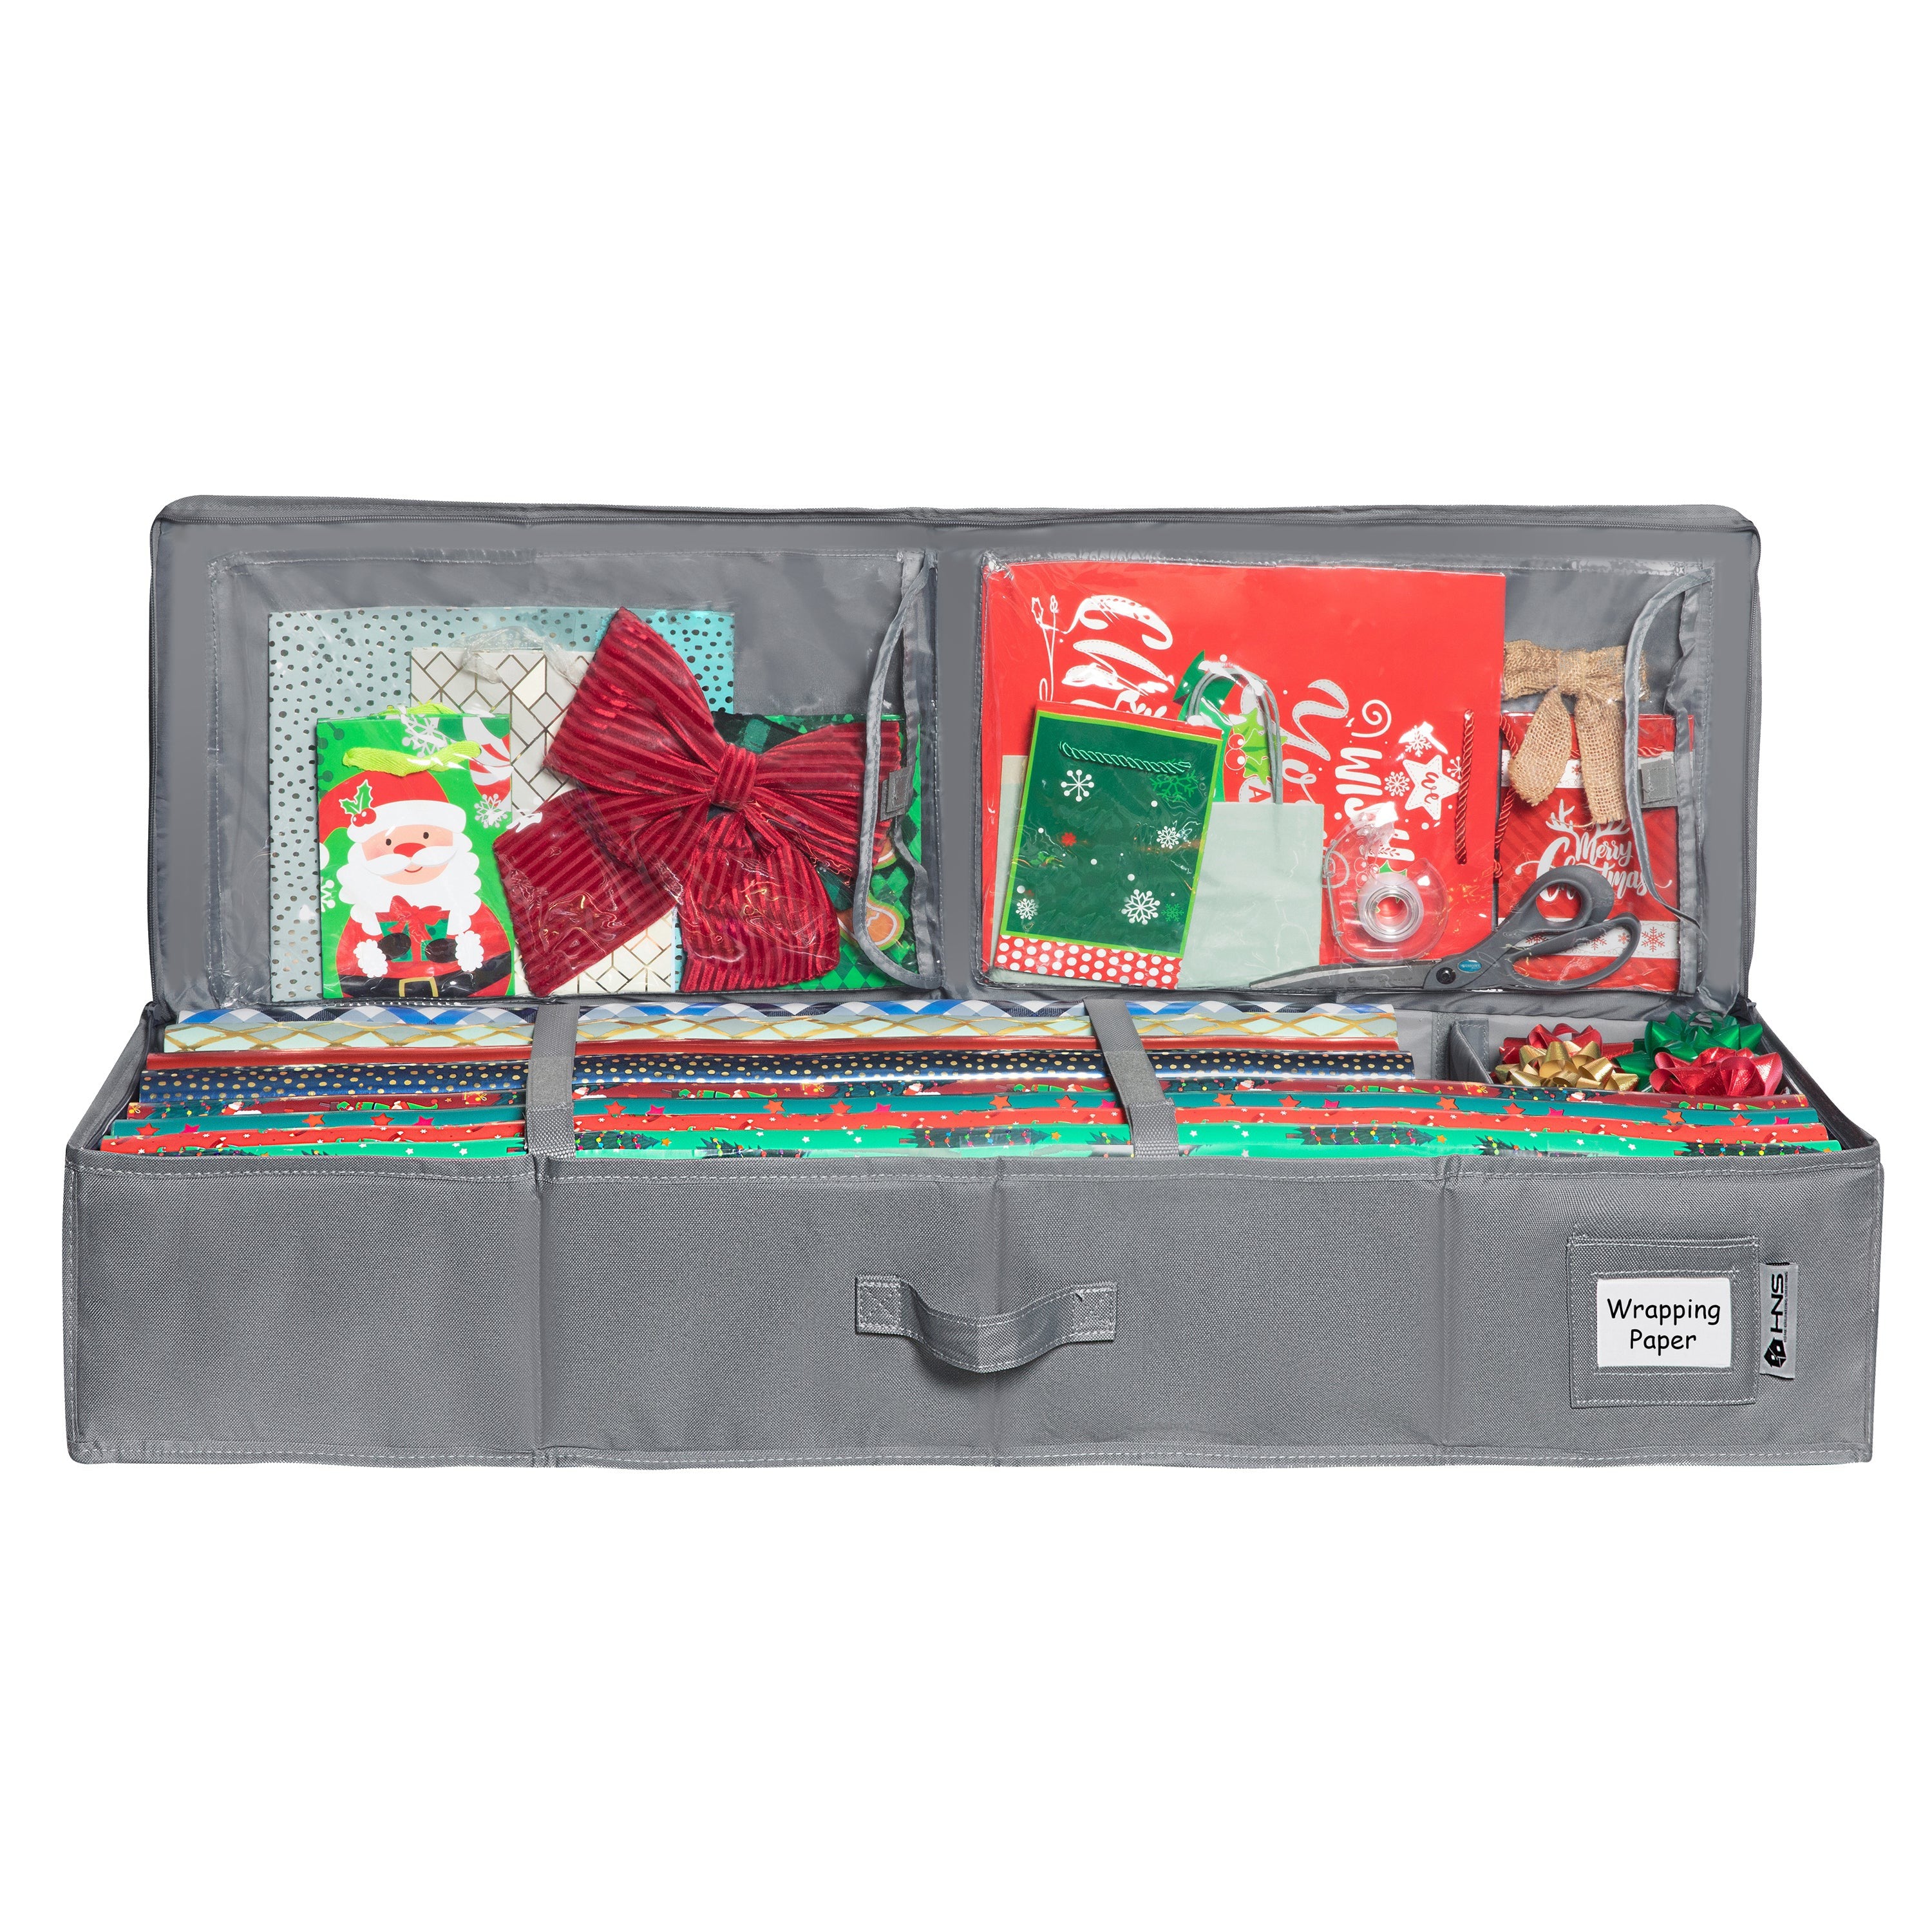 Delixike Wrapping Paper Storage Container,Christmas Wrapping Paper Storage Organizer with Pockets, 600D Heavy Duty Underbed Gift Wrap Organizer Fits